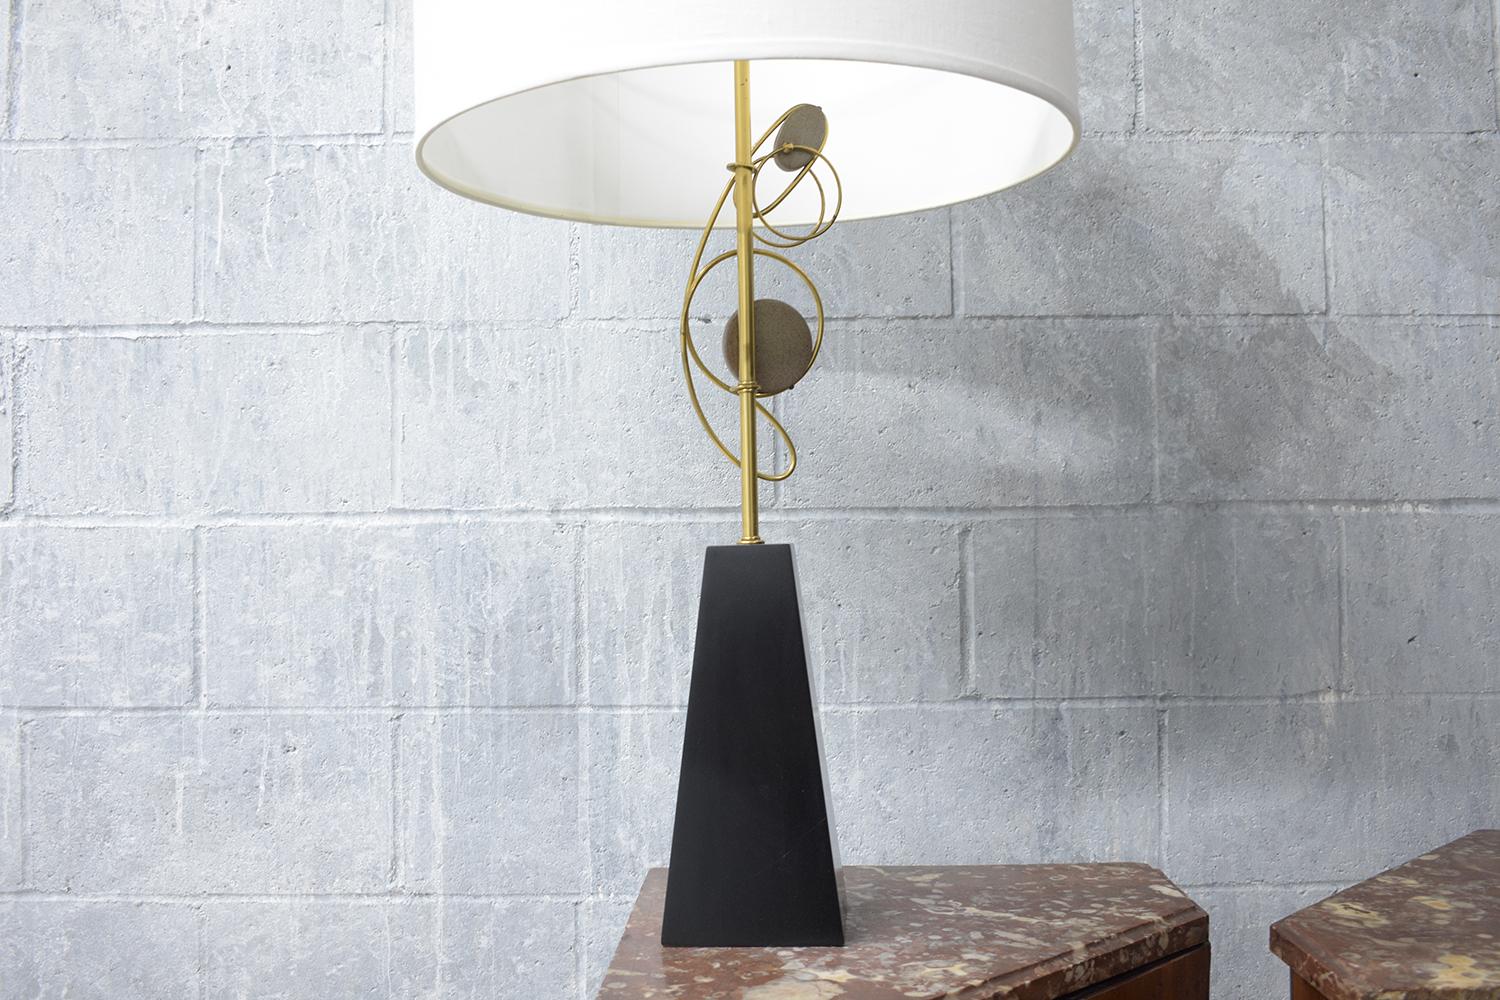 Embrace the timeless elegance of the 1960s with our extraordinary pair of mid-century modern table lamps. These lamps, in great condition, are a testament to the unique style and craftsmanship of the era. Beautifully crafted from a wood and brass